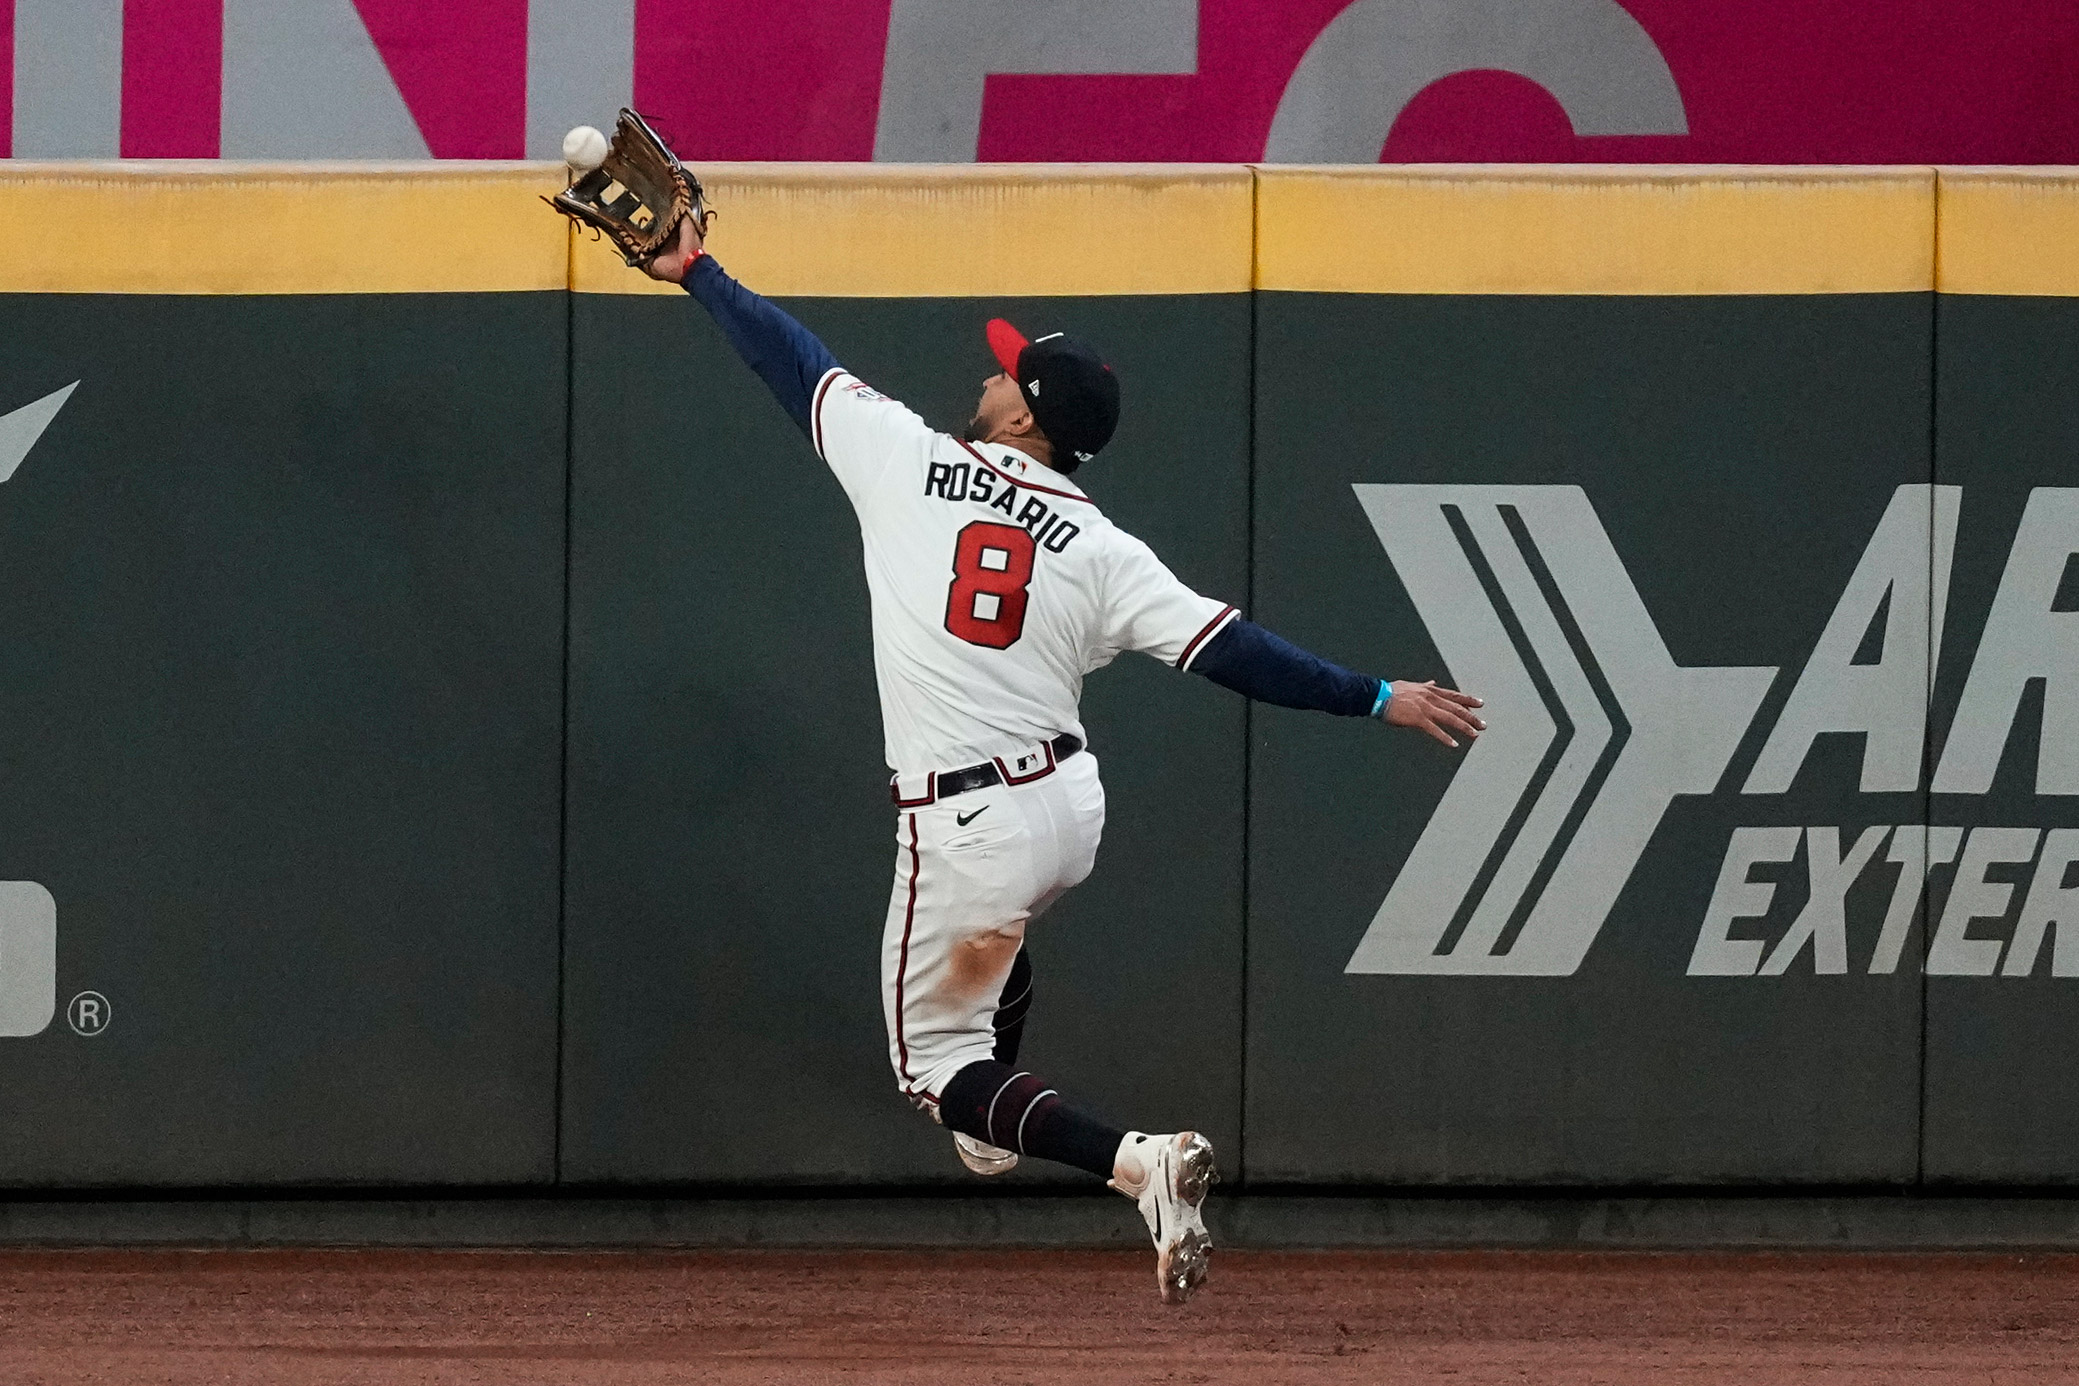 Braves left fielder Eddie Rosario catches a fly ball hit by the Astros' Jose Altuve during the eighth inning.